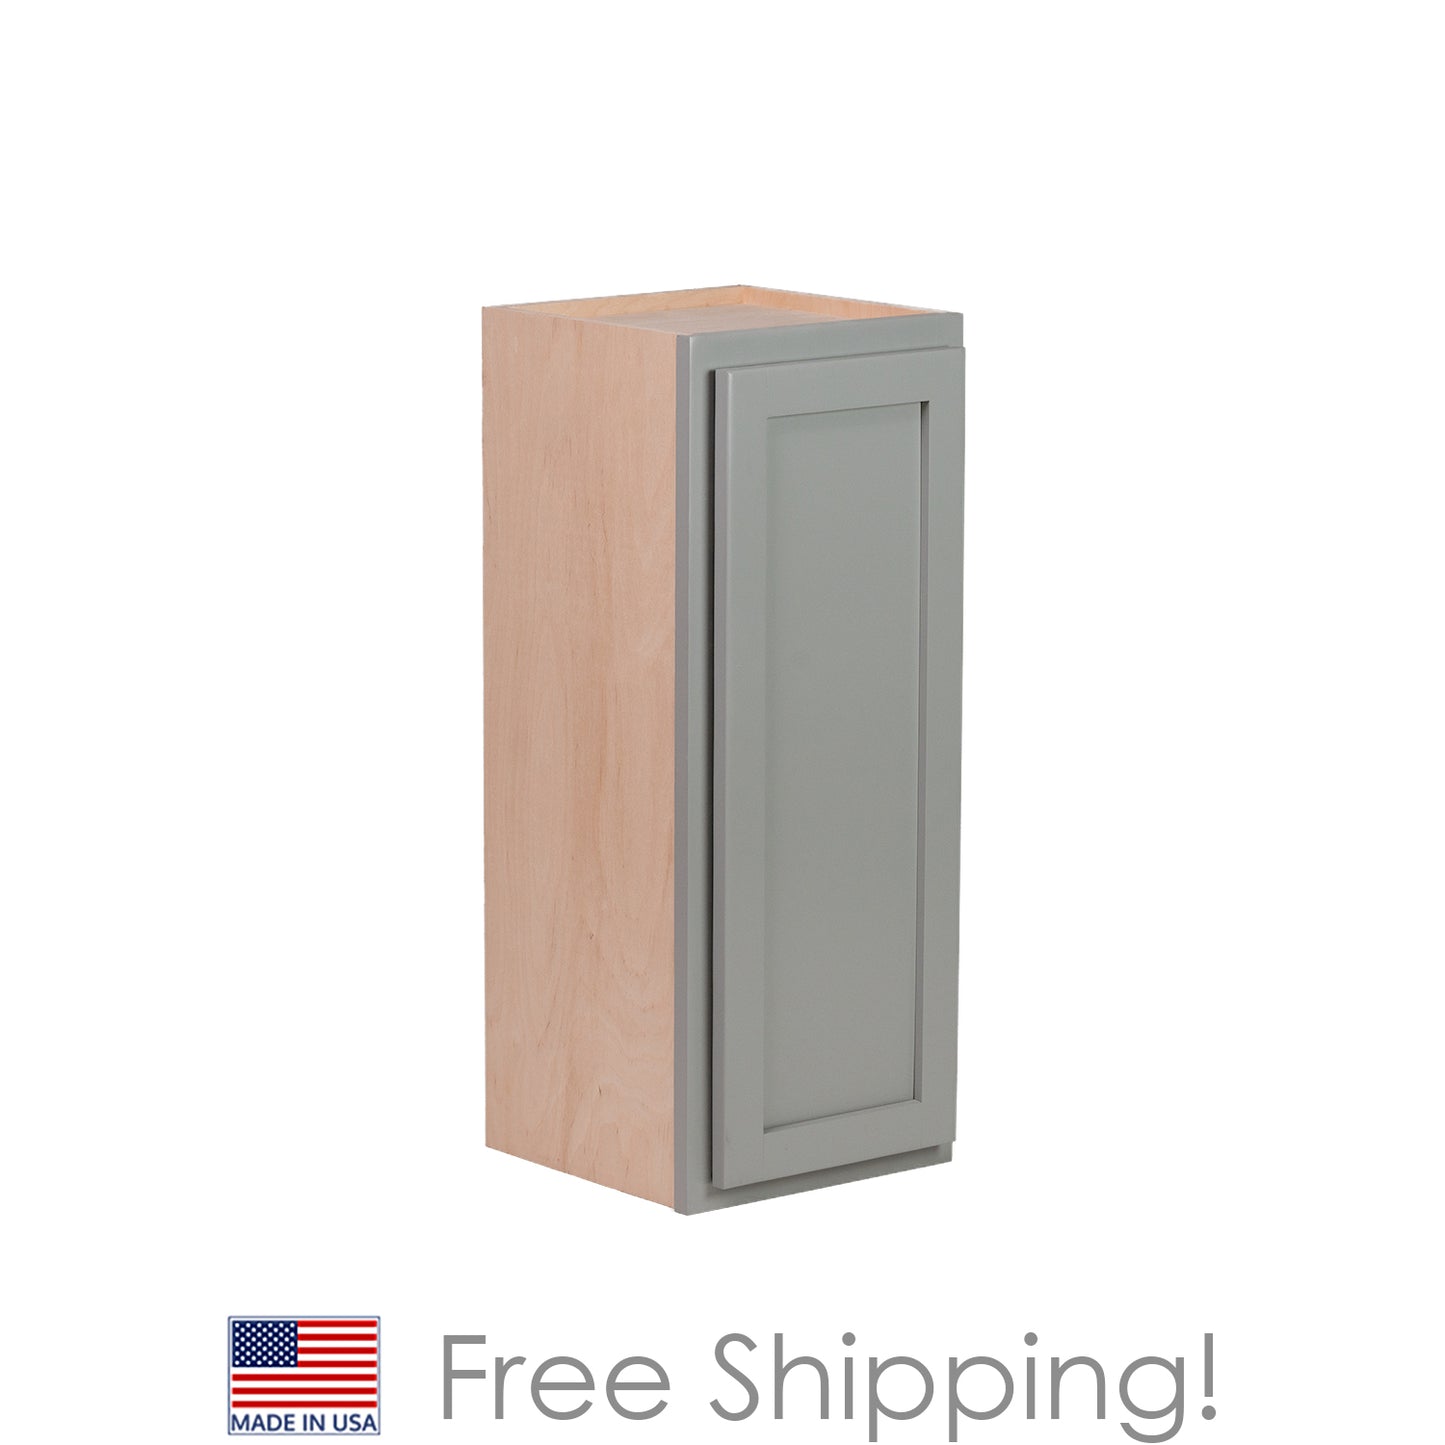 Quicklock RTA (Ready-to-Assemble) Magnetic Gray Wall Cabinet- Single Door 36"H x (18", 21", 24"W)